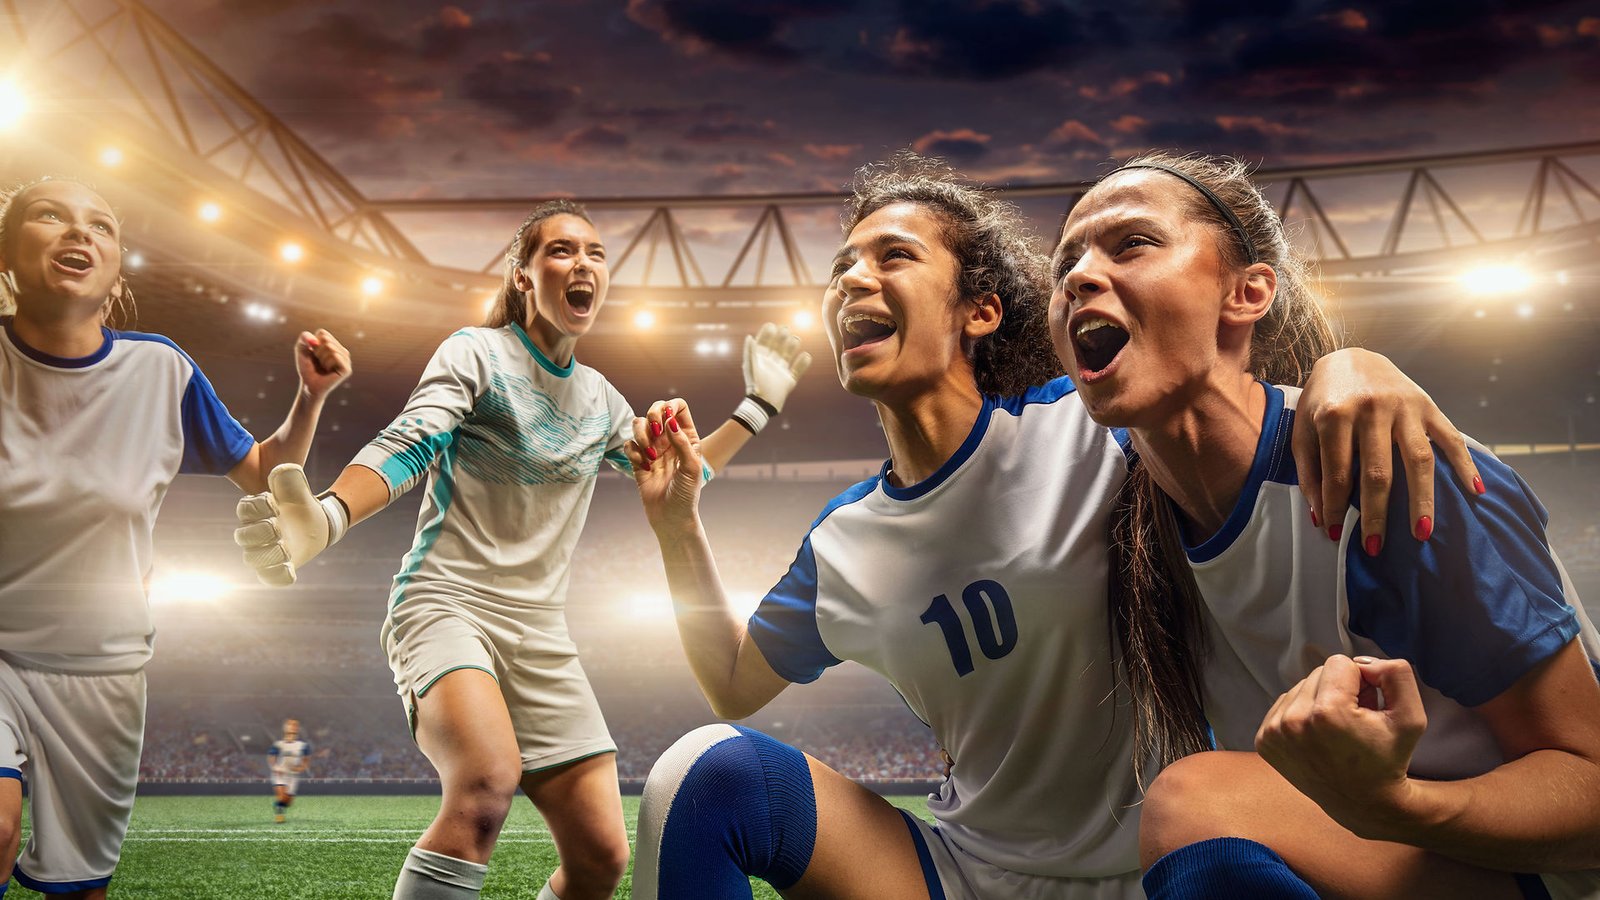 young women soccer players celebrating score